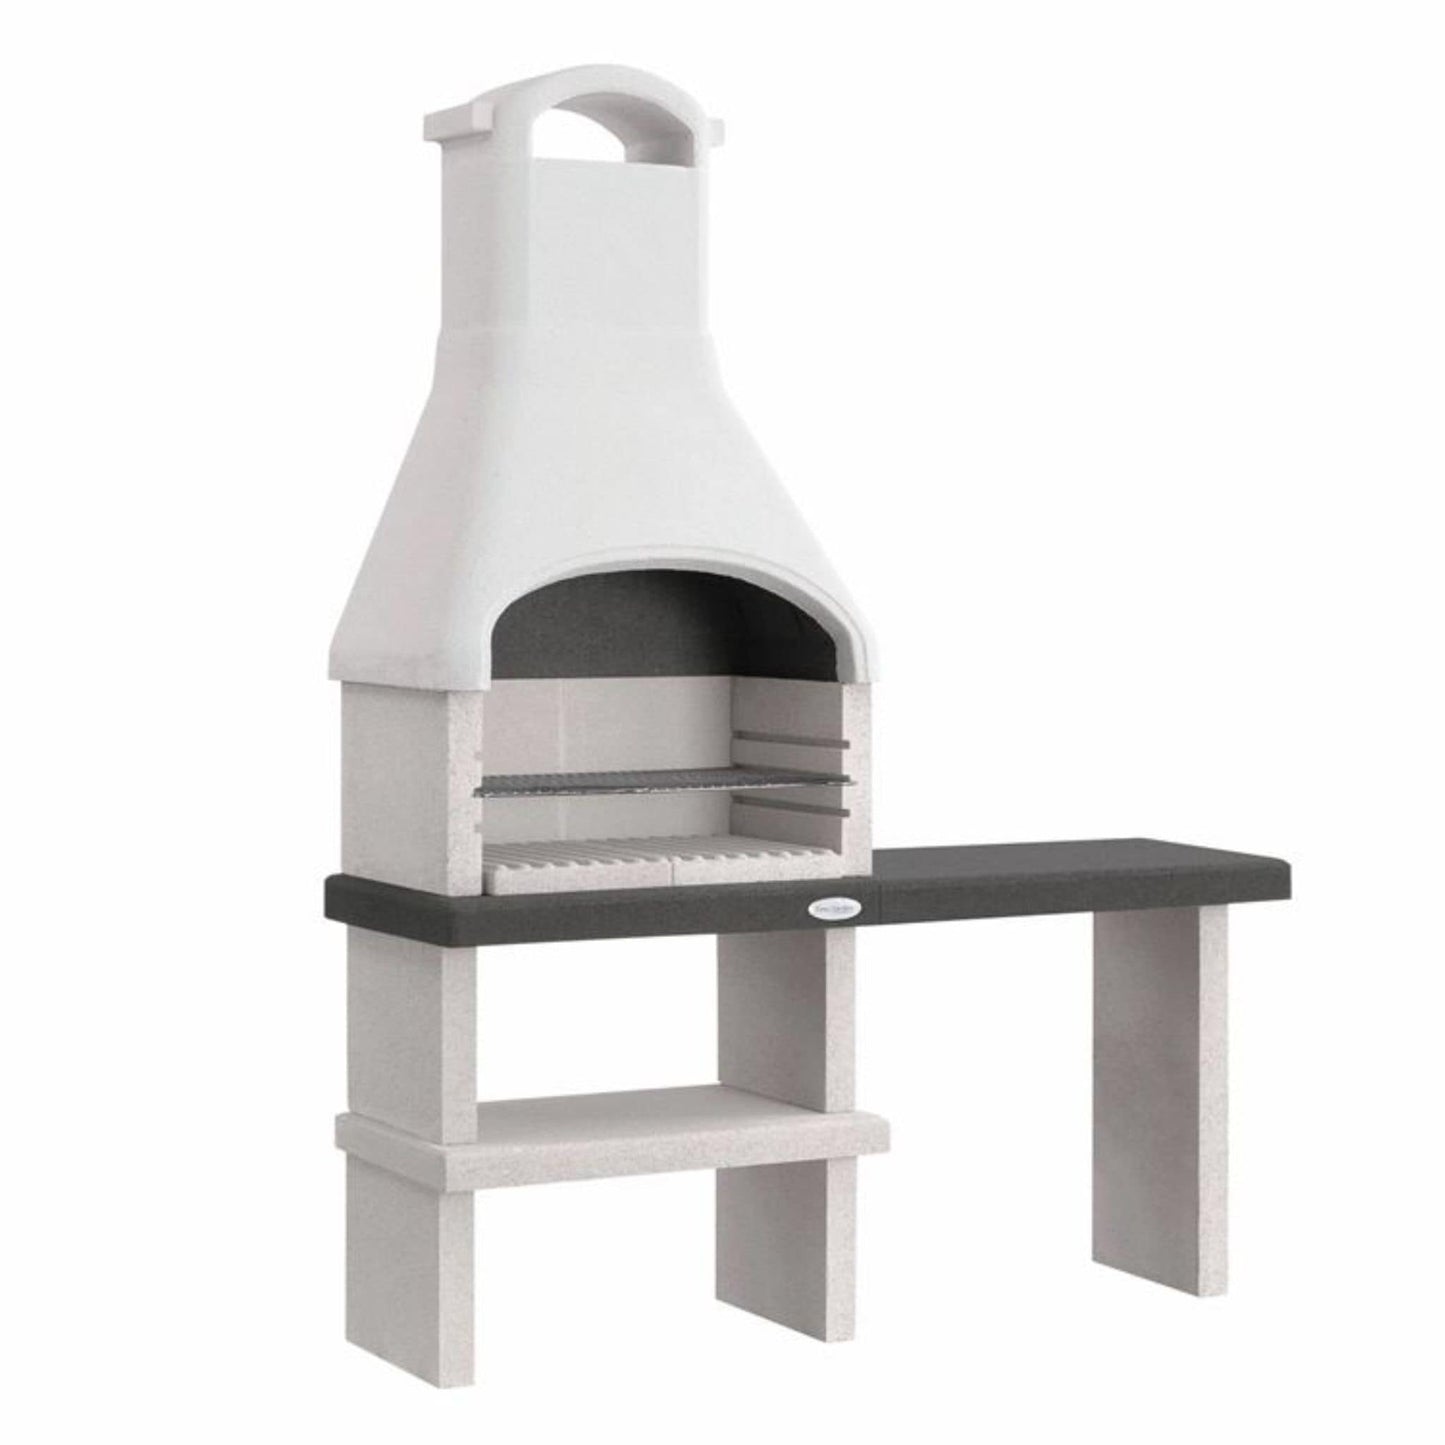 Palazzetti Orlando Masonry BBQ Grill - Wood or Charcoal Fired in grey and White